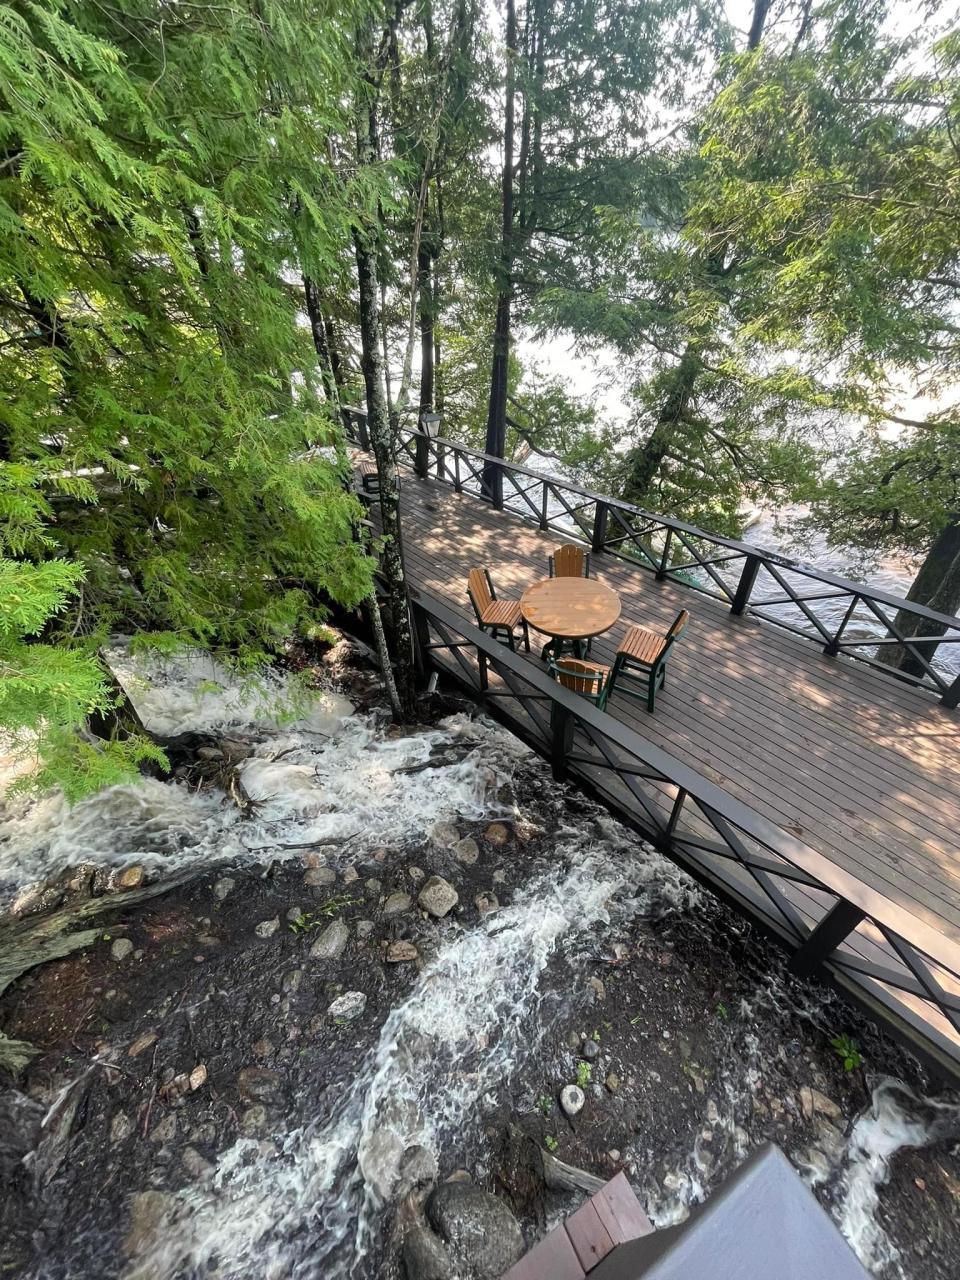 A bridge with a table and chairs over a rushing river.